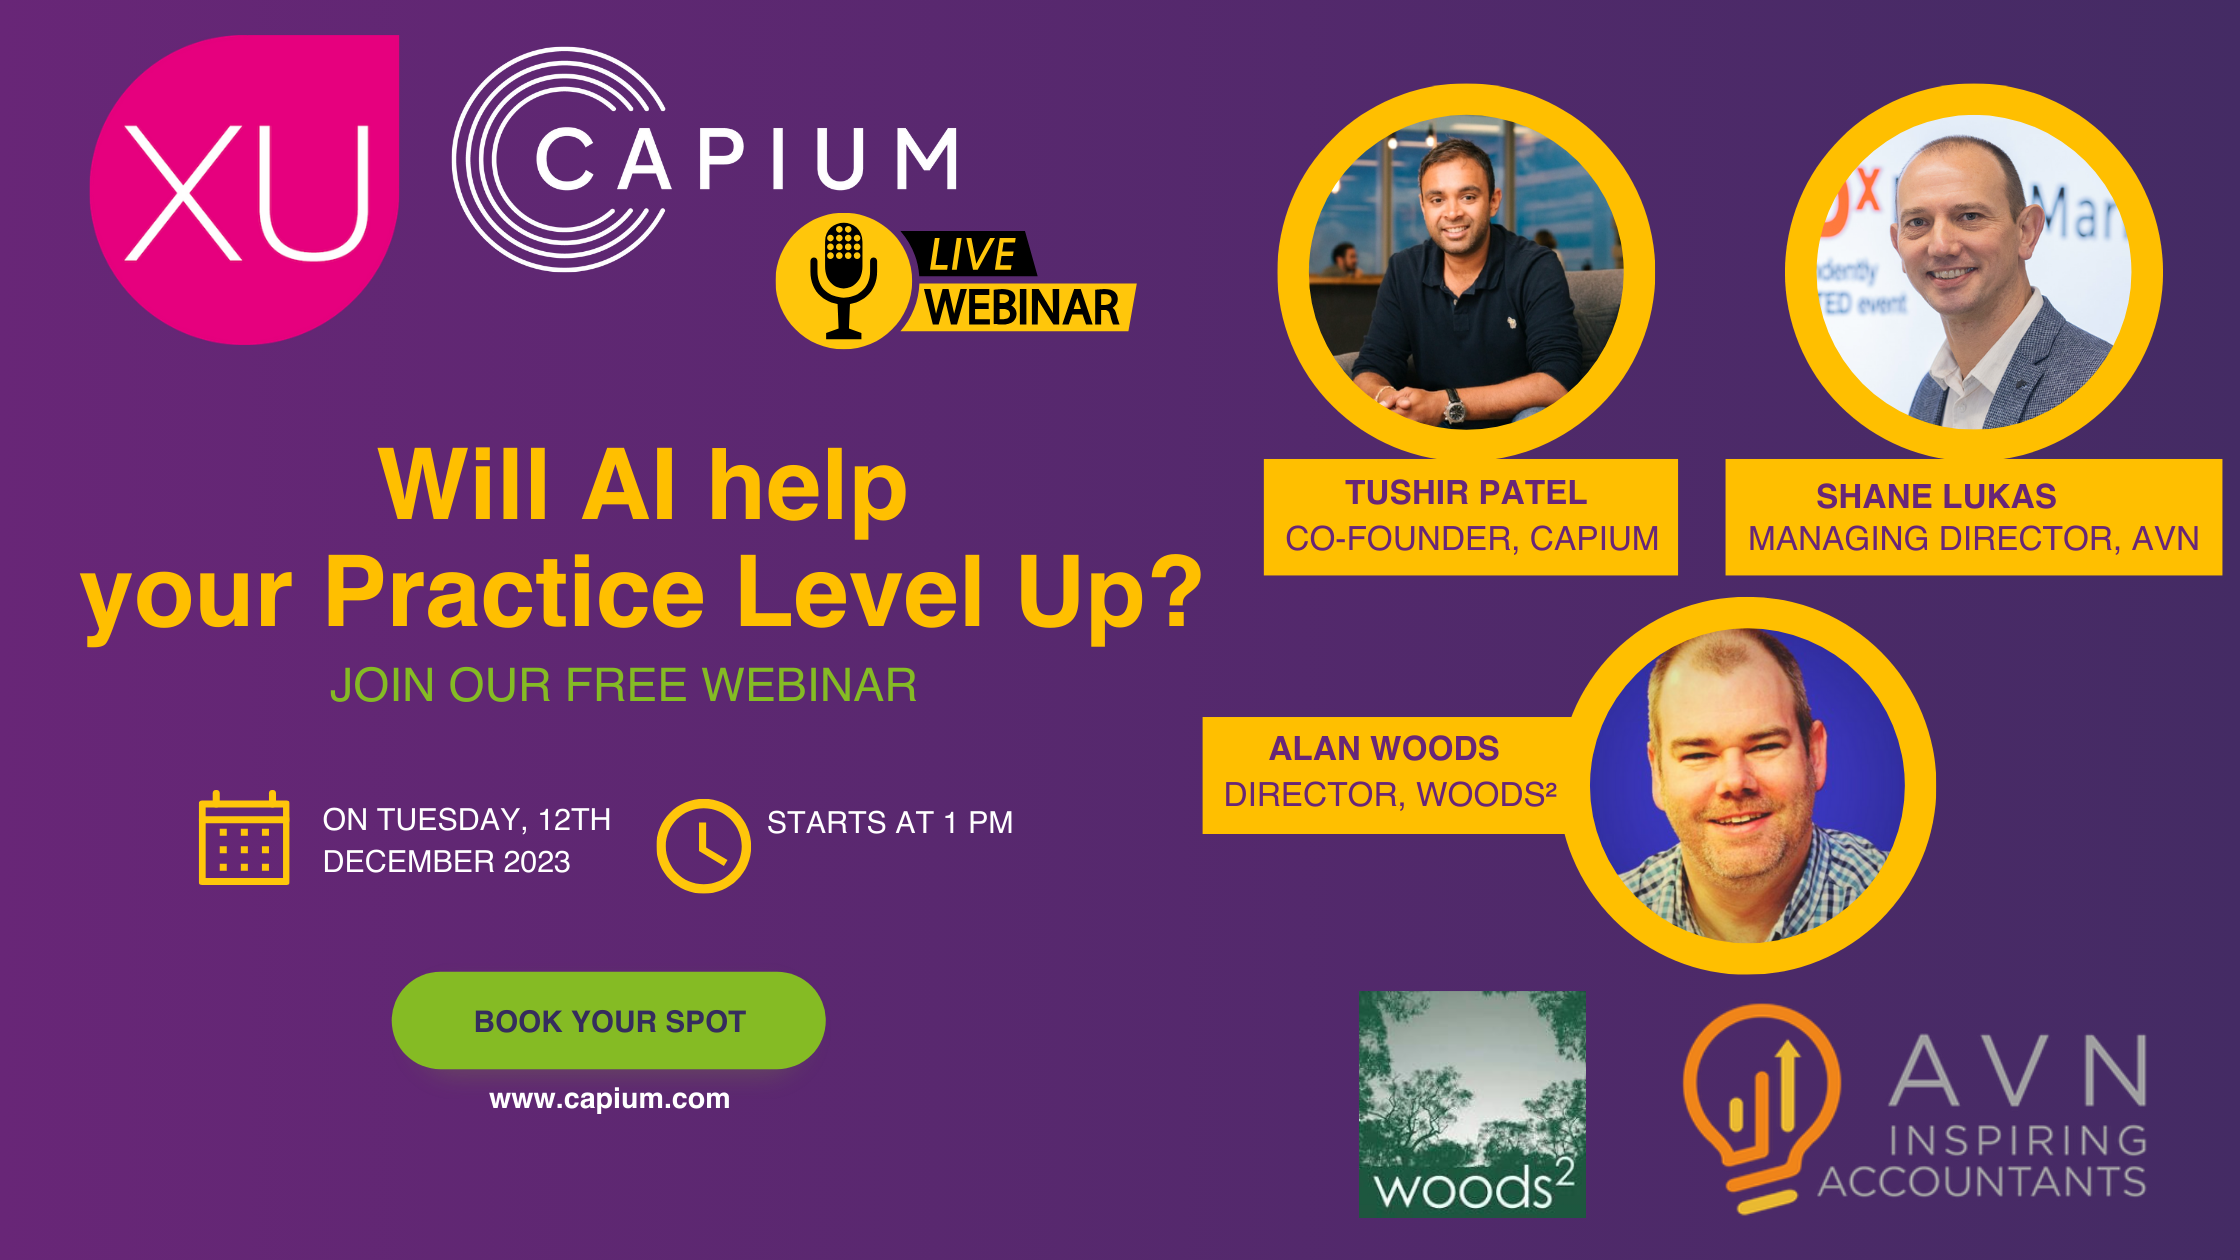 XU: Will AI help your Practice Level Up? with Capium image